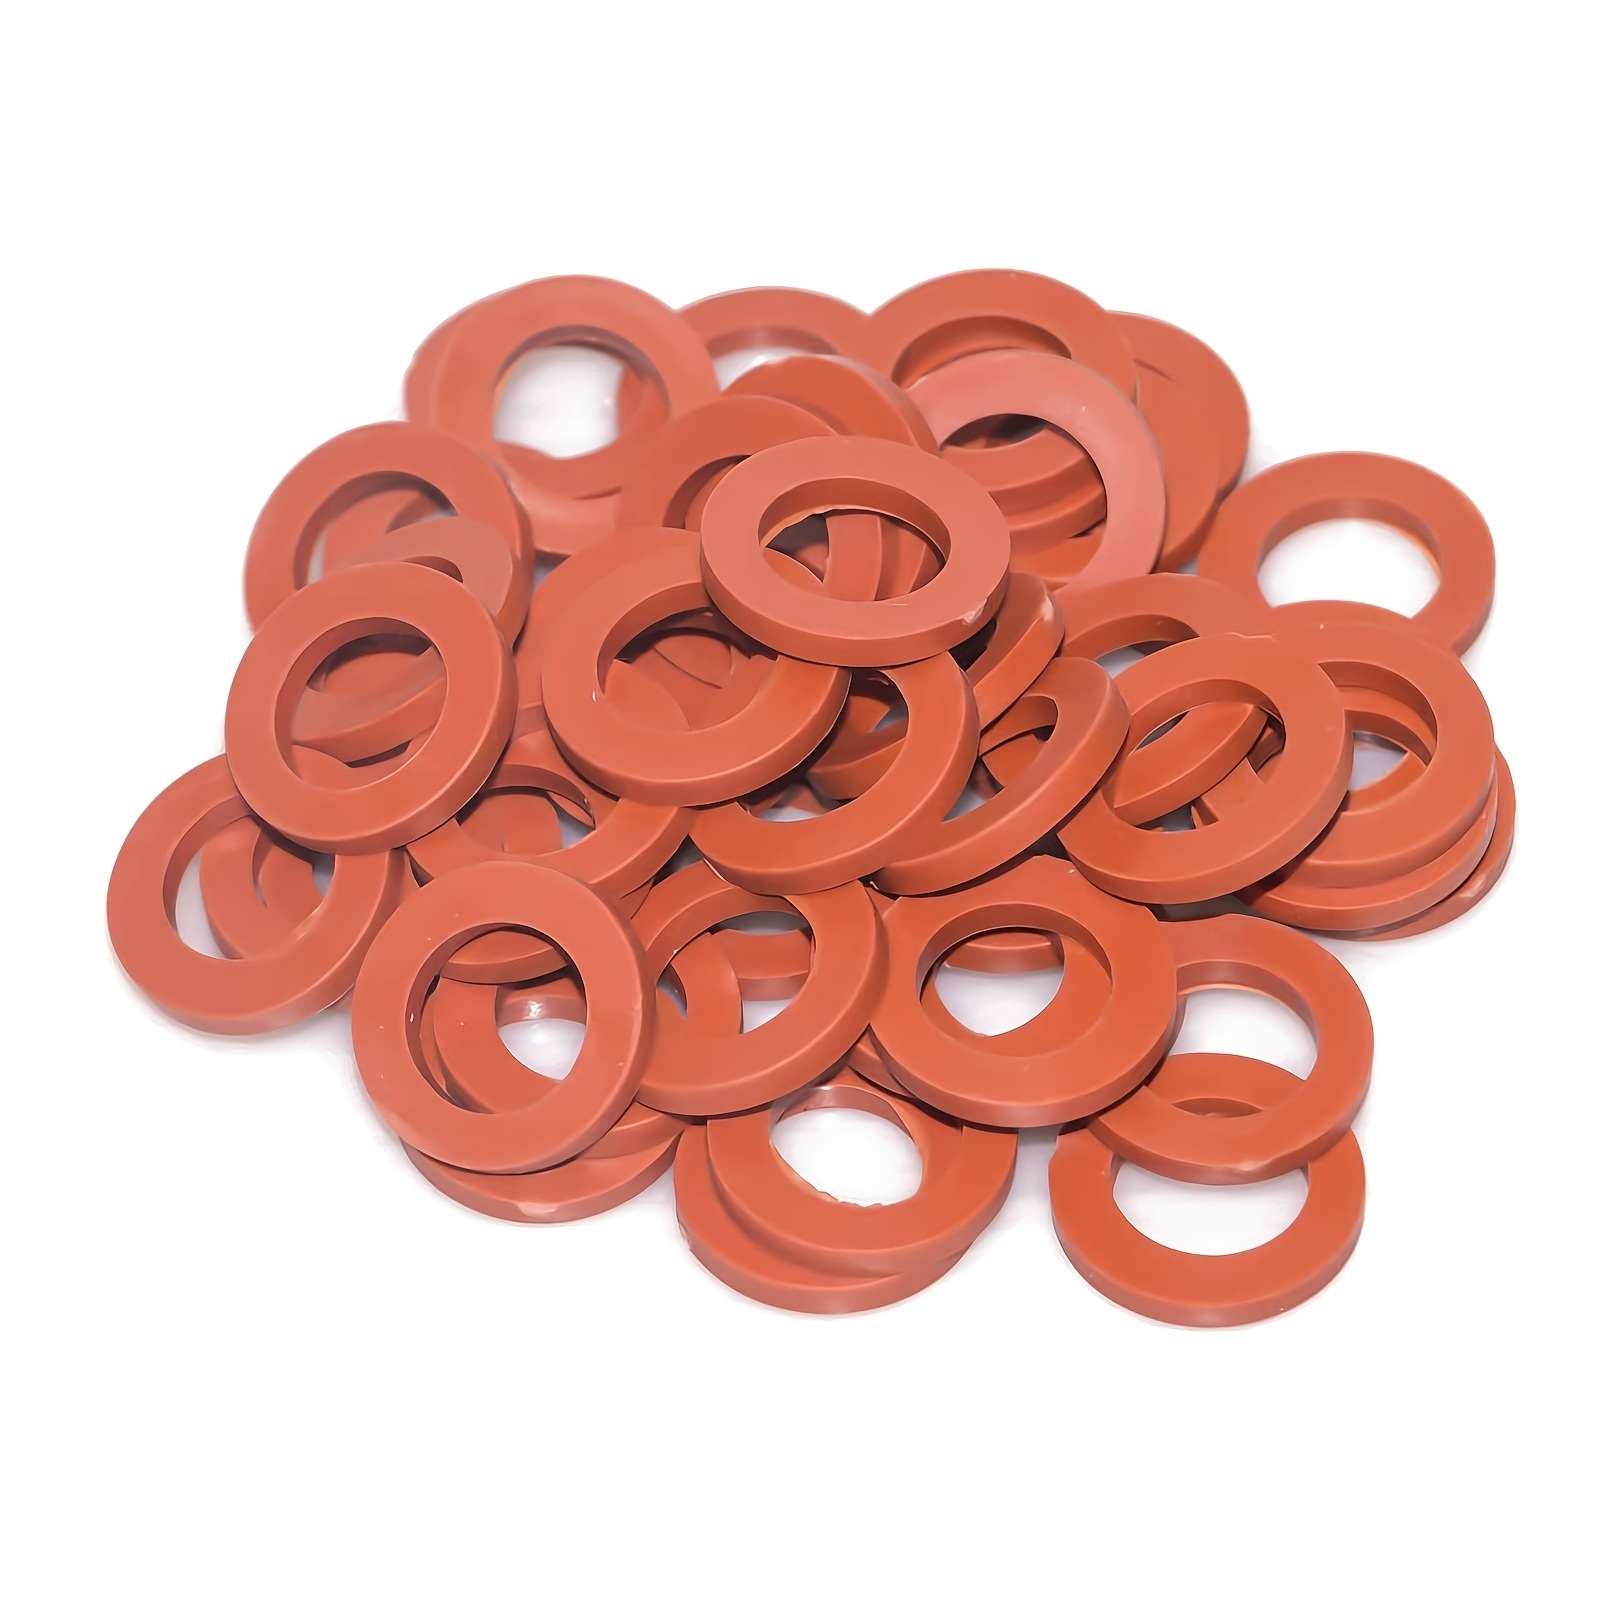 

10pcs Garden Hose Washer Heavy Duty Rubber Washer, Red O-rings Silicone Washer Gasket Combo Pack For Garden Hose